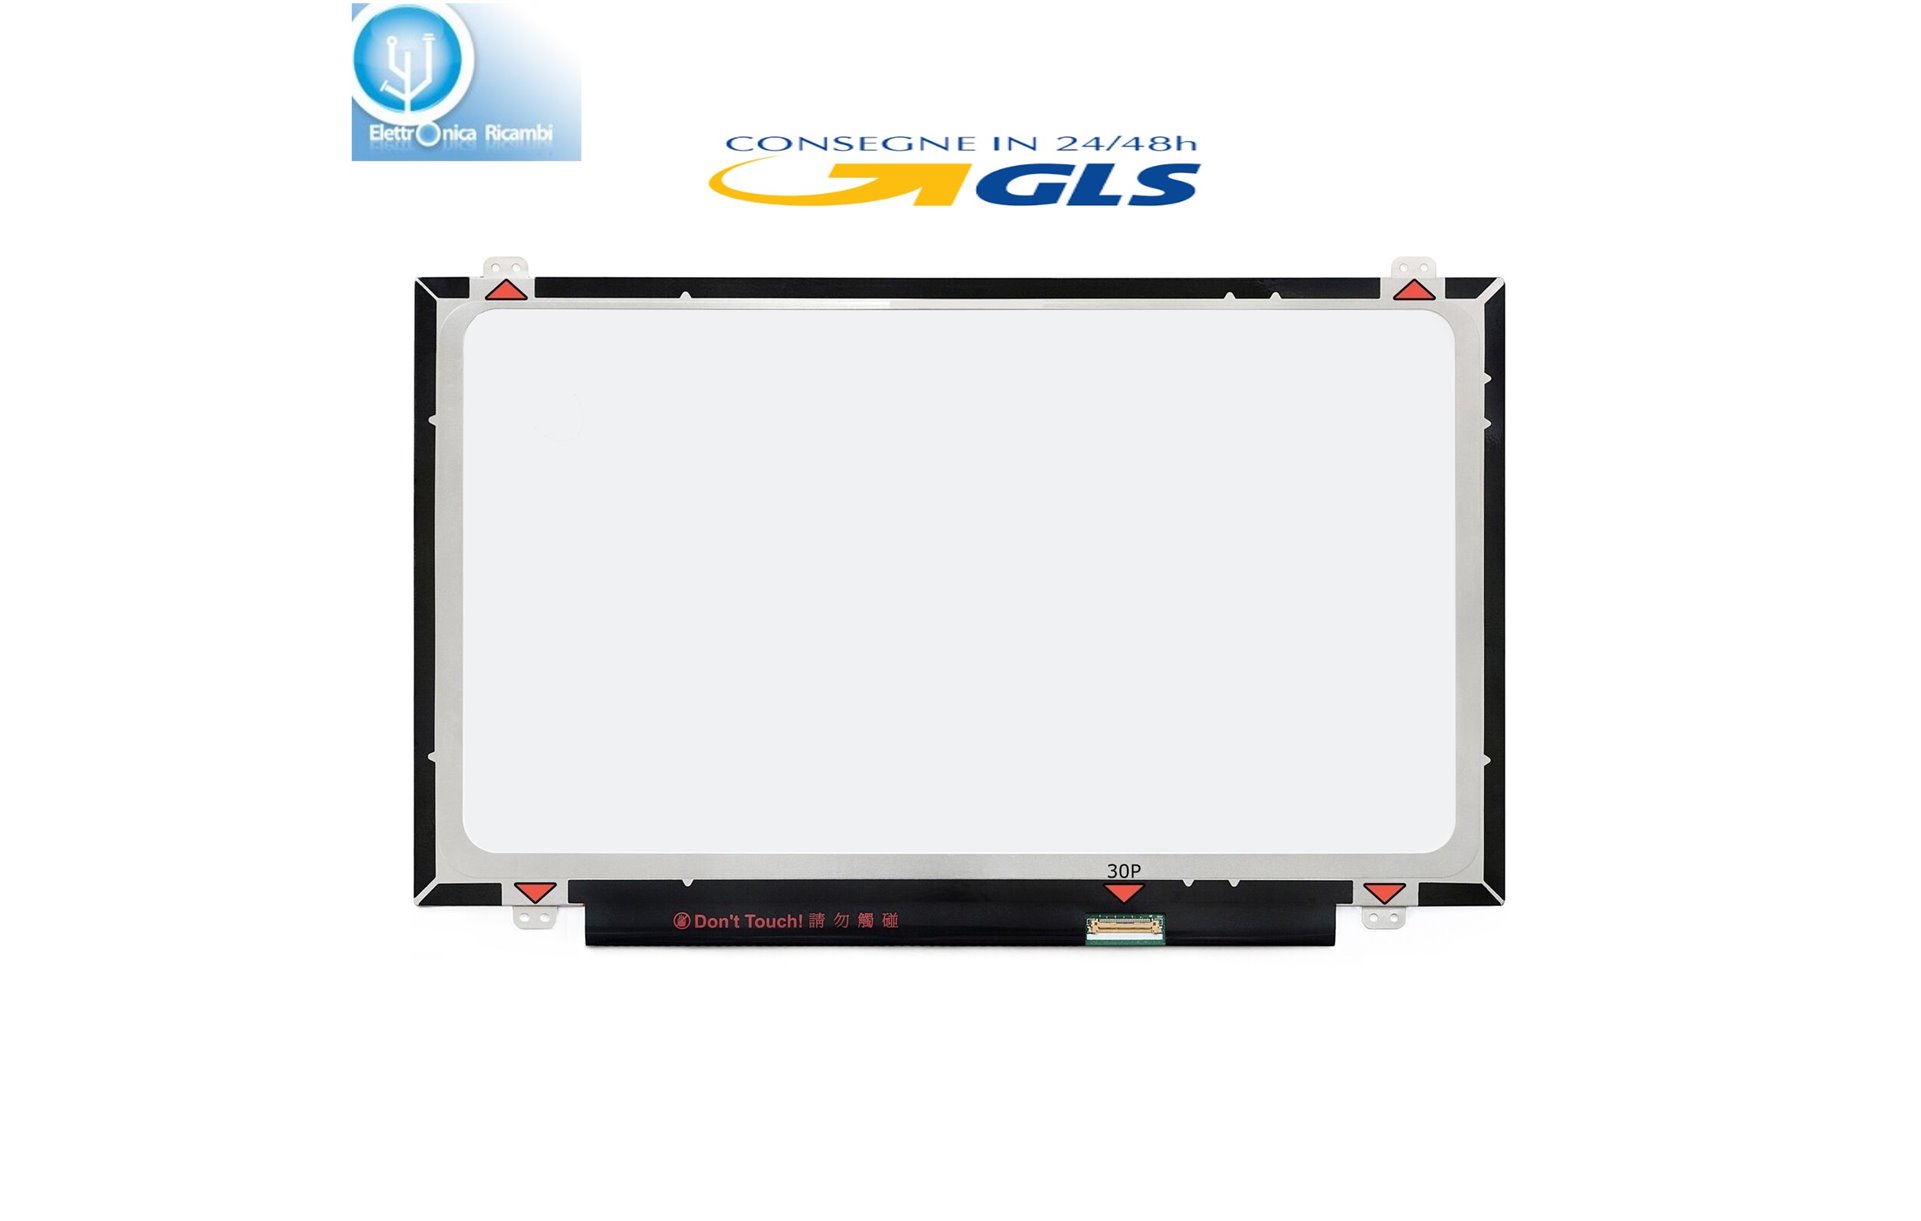 Display LCD Schermo Acer SPIN 3 SP314-52 SERIES 14.0 LED SLIM 30 pin HD (1366x768)